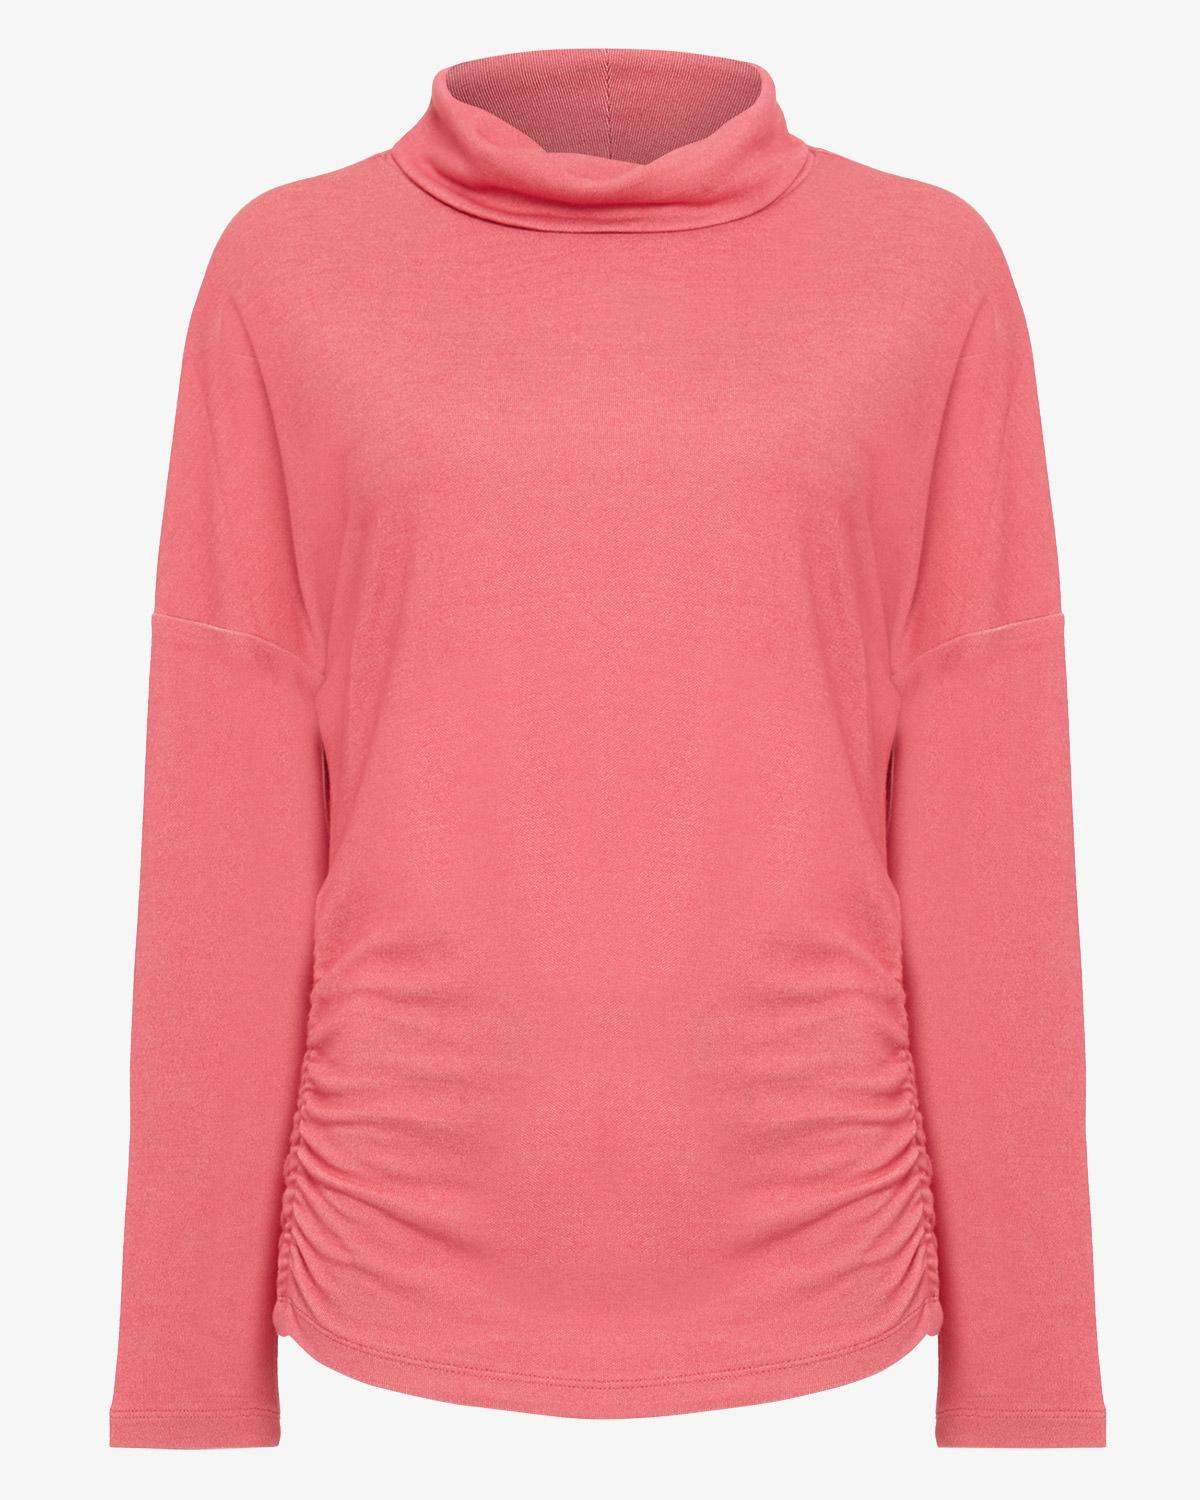 Phase Eight Pink Liora Cowl Neck Top in Pink - Save 23% - Lyst